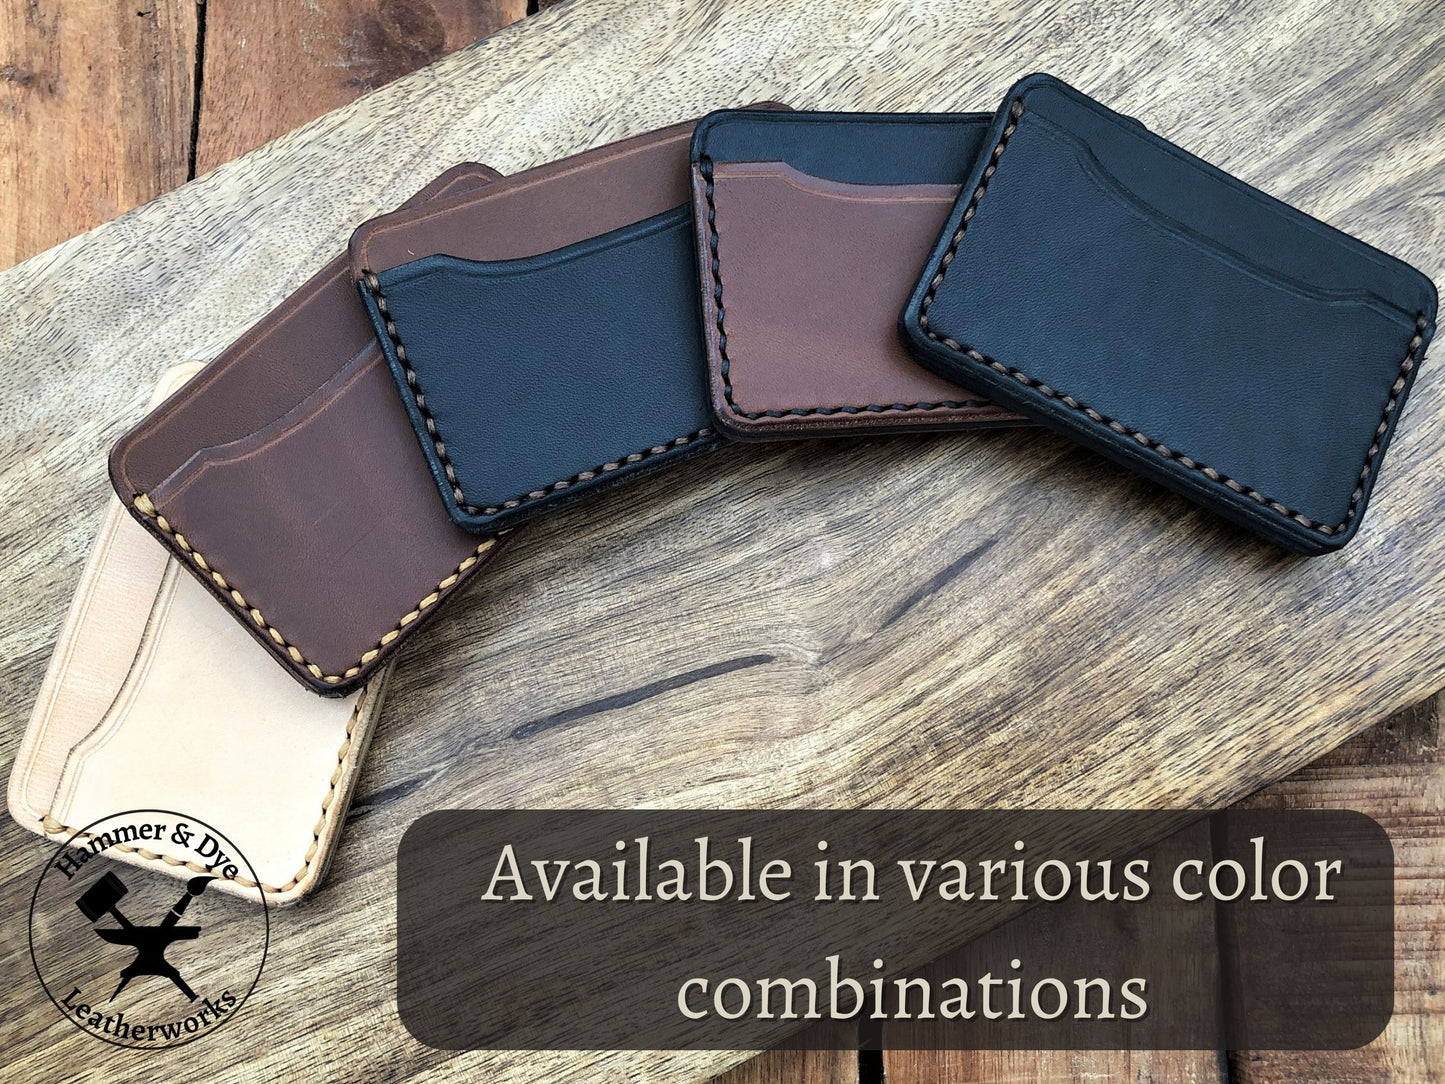 Color options this handmade leather minimalist card wallet can be made in